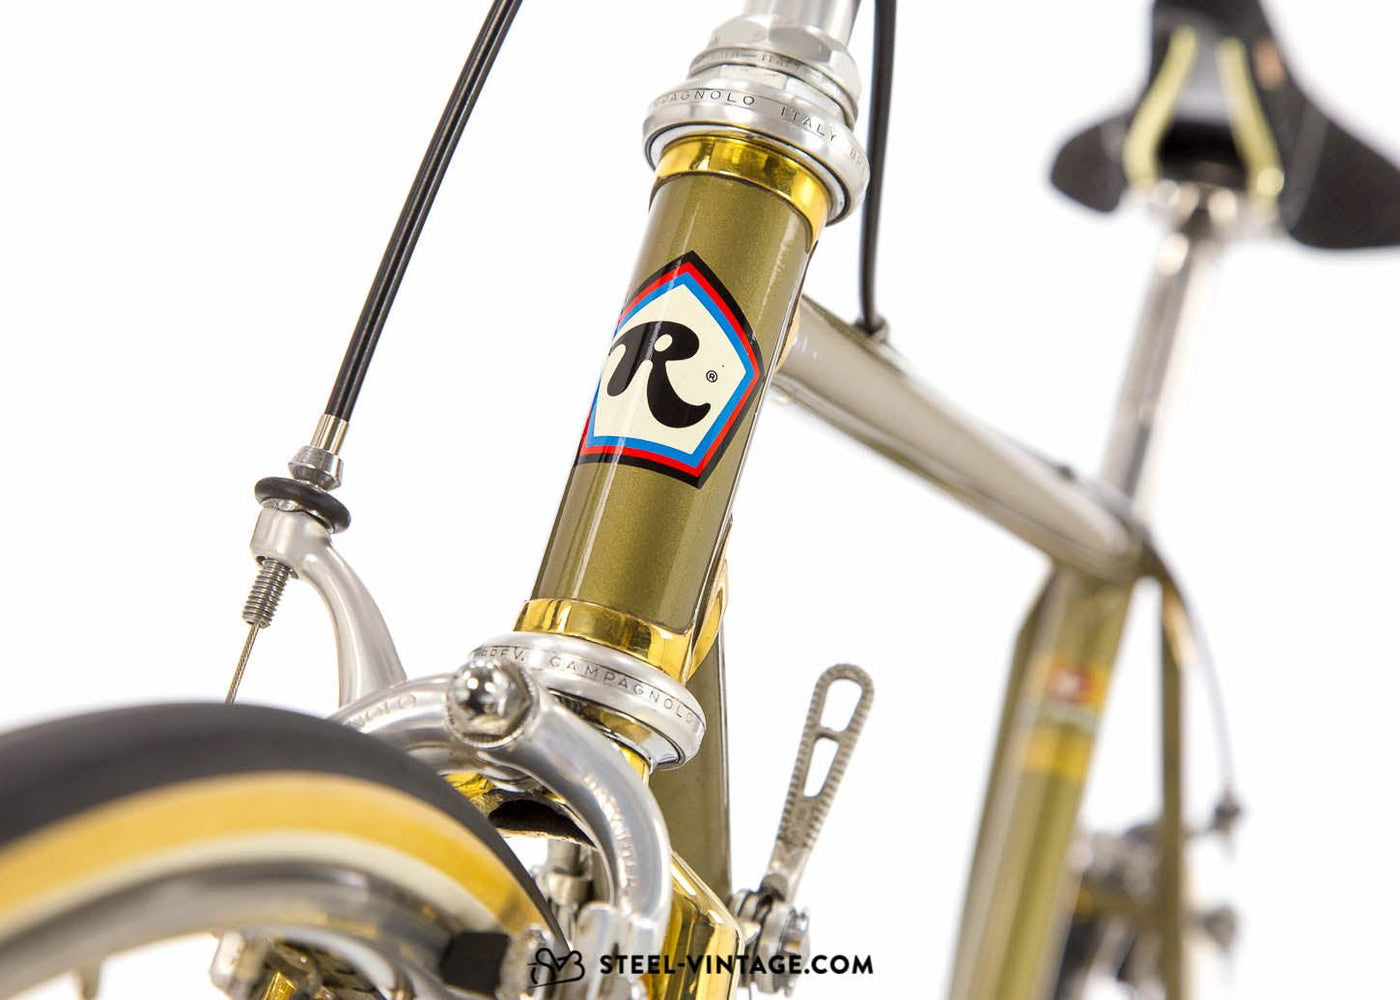 Rossin Record Oro Classic Road Bicycle 1980 - Steel Vintage Bikes